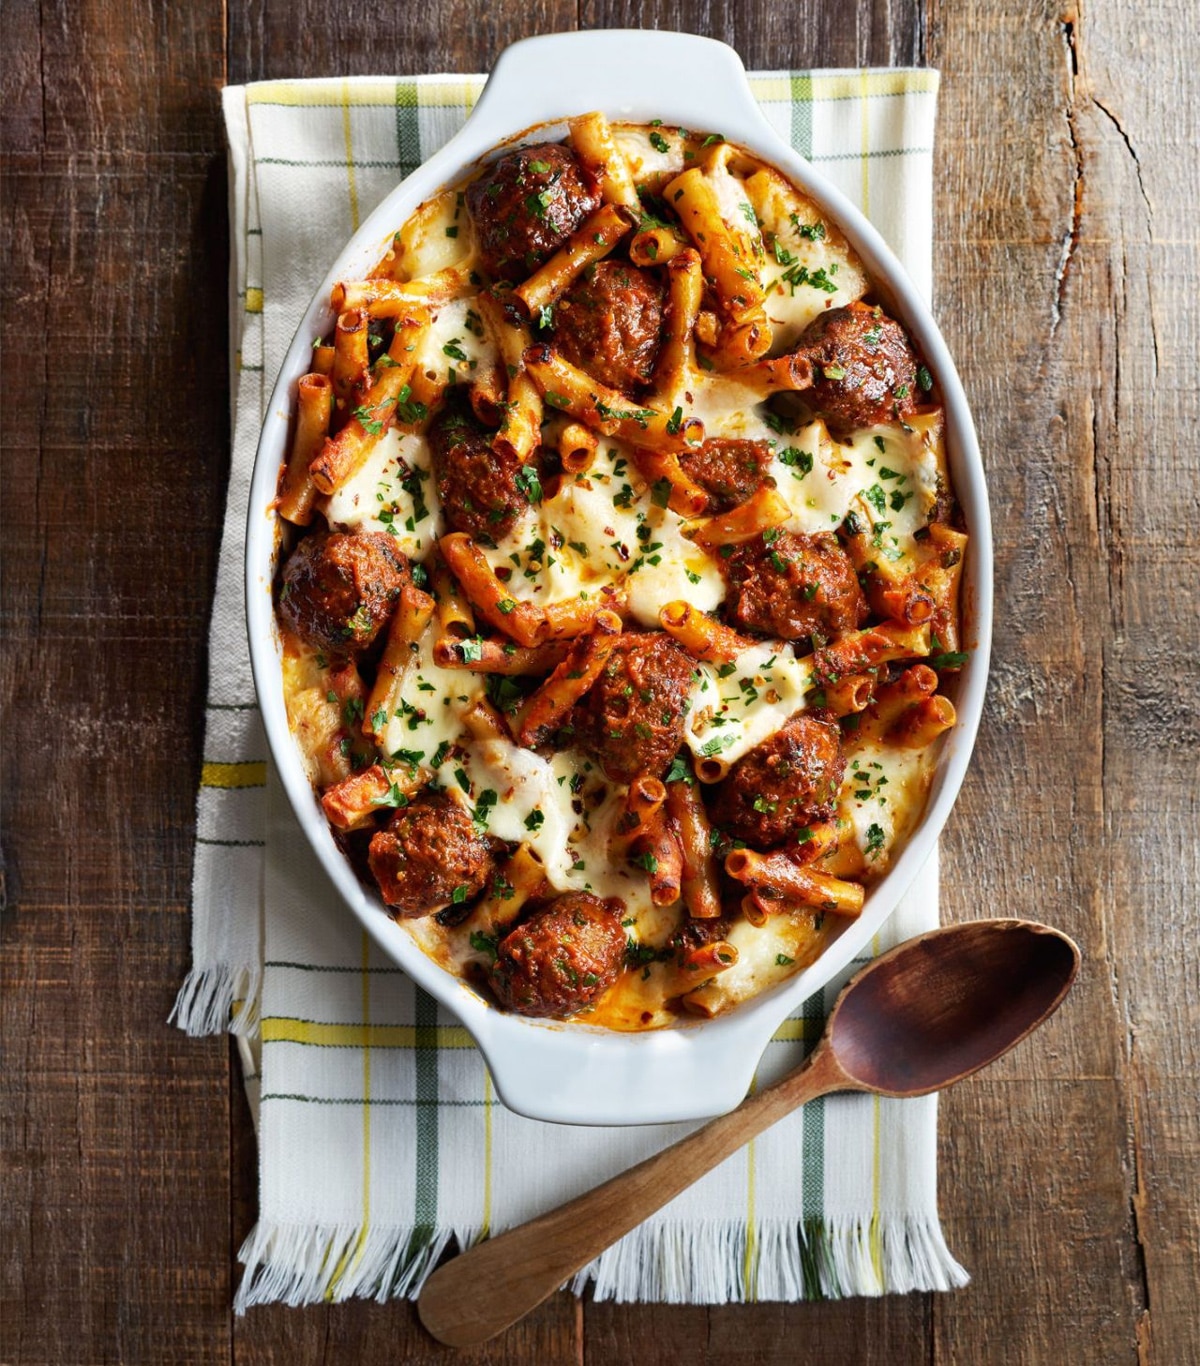 Meatball-and-spinach baked ziti